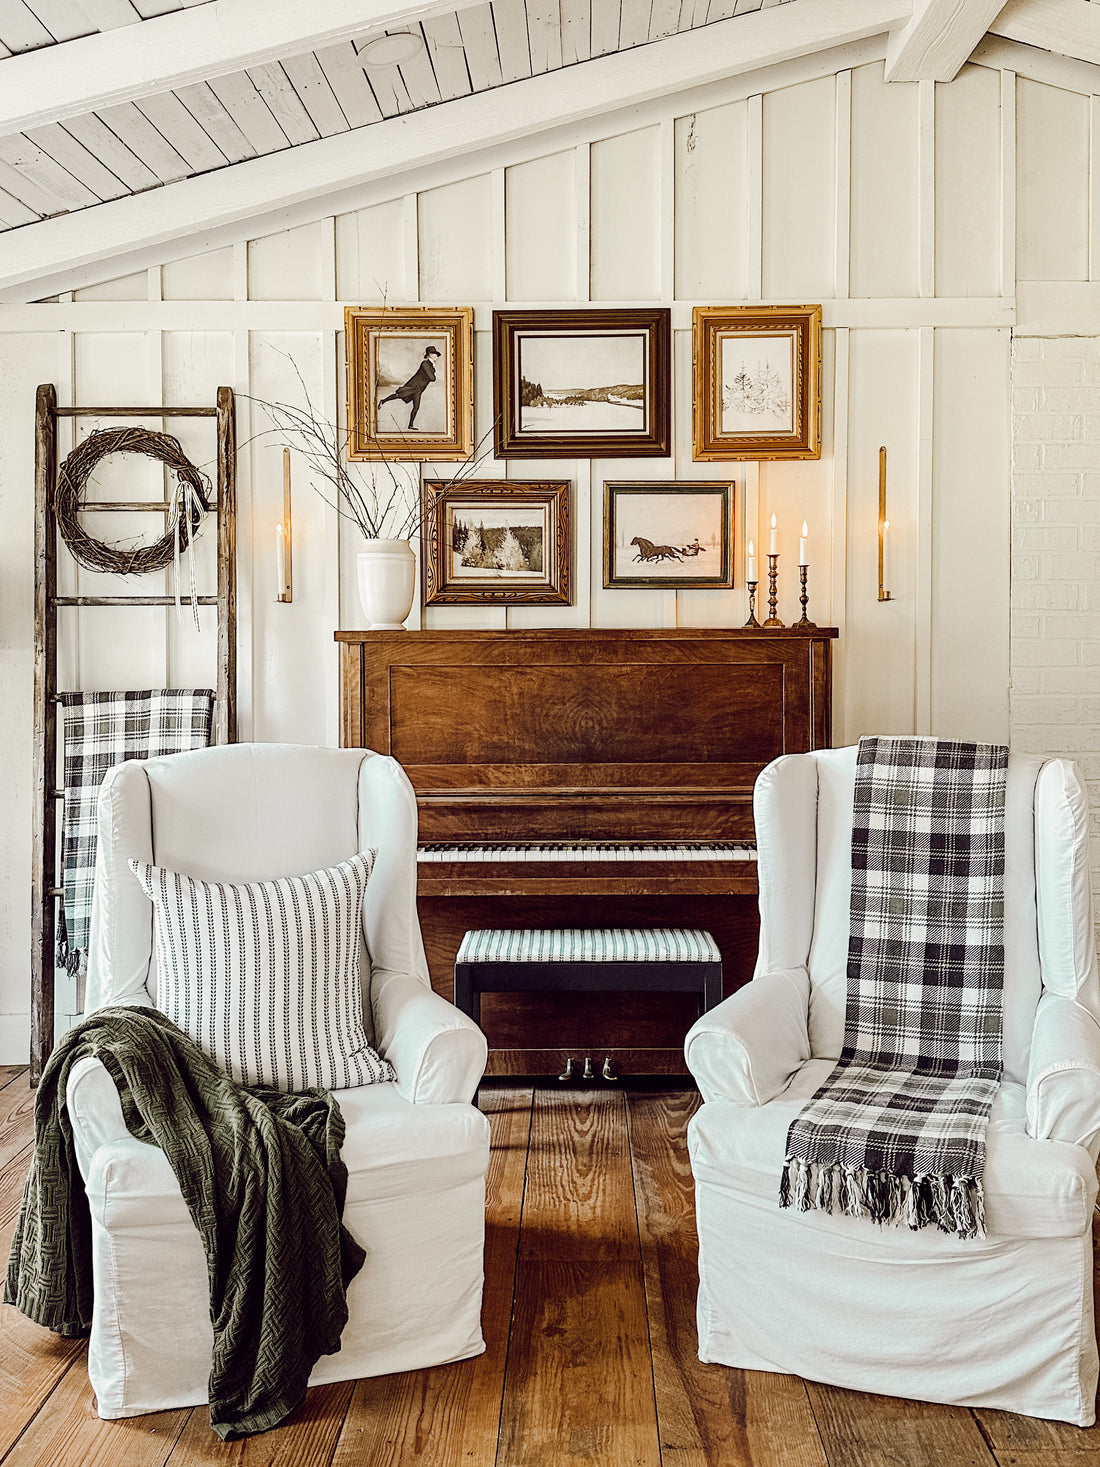 4 Tips for Cozy Winter Decorating